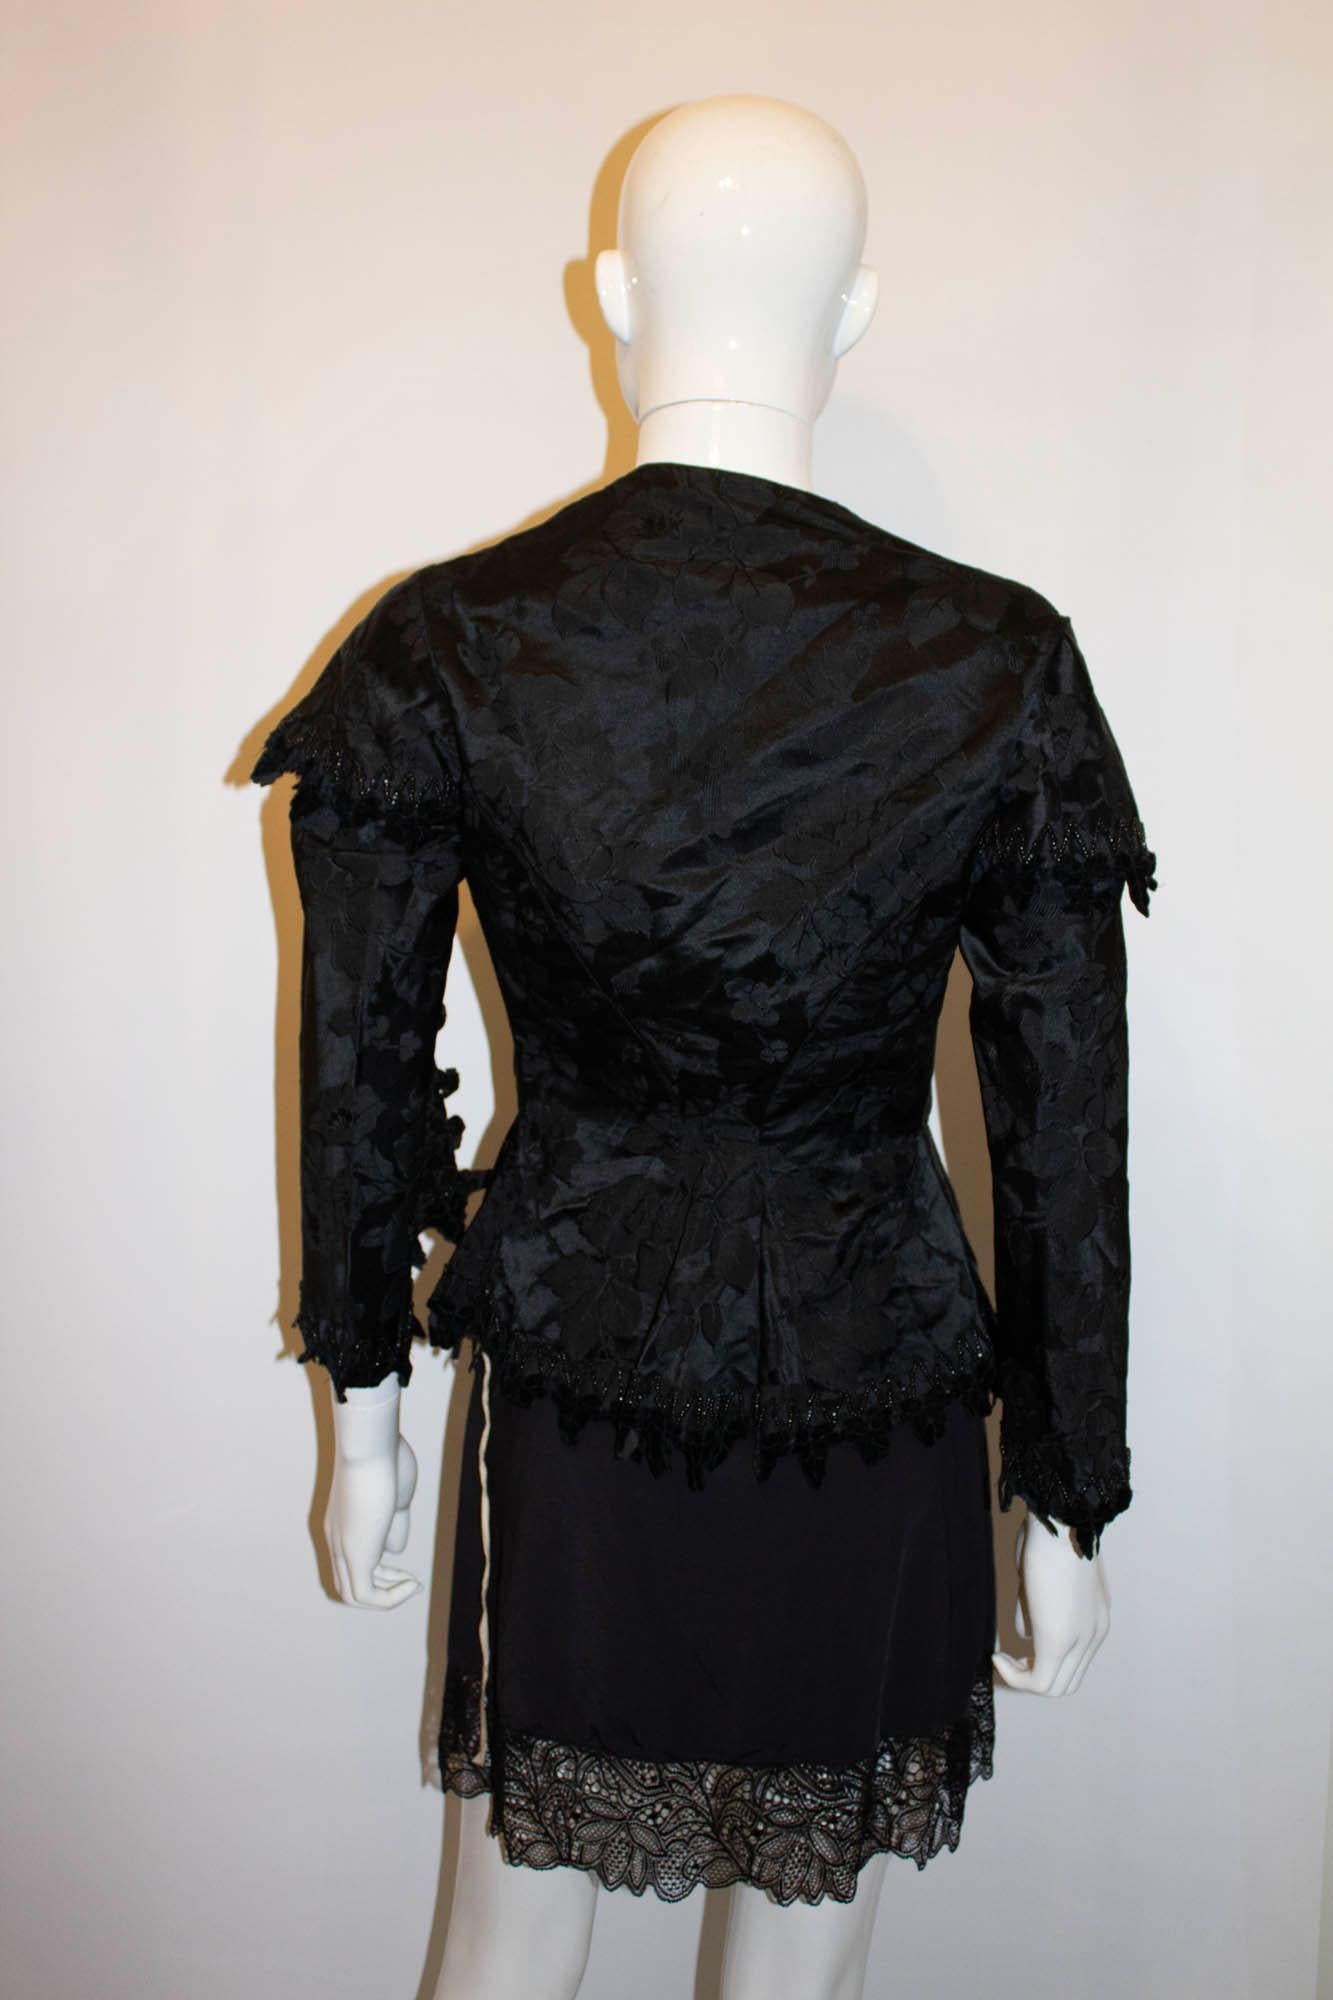 A wonderful and wearable black silk Victorian jacket. The jacket has a wonderful shape, with boning, bead detail and hook and eye fastening. Measurement: Bust up to 35'', length 25''